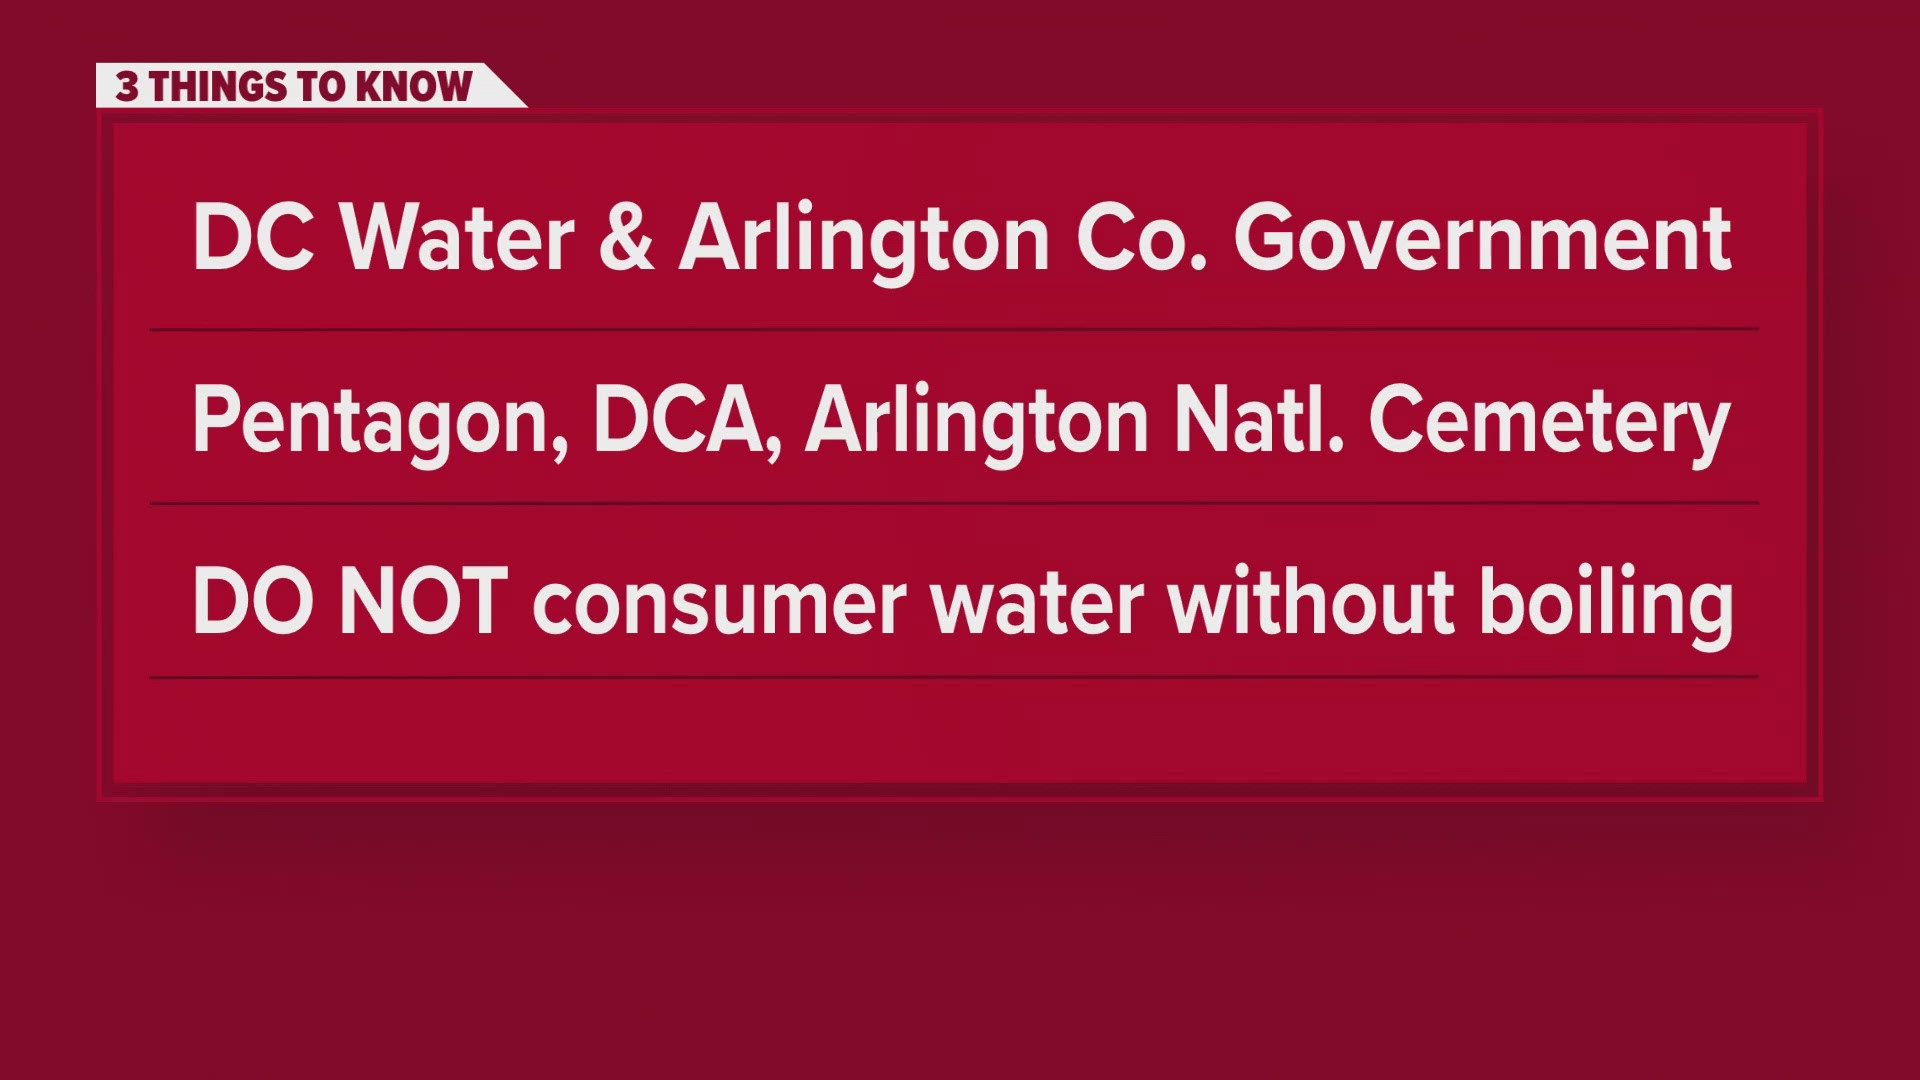 DC Water and Arlington County government advise to not consume water without boiling due to a drop in water supply in the Washington Aqueduct.